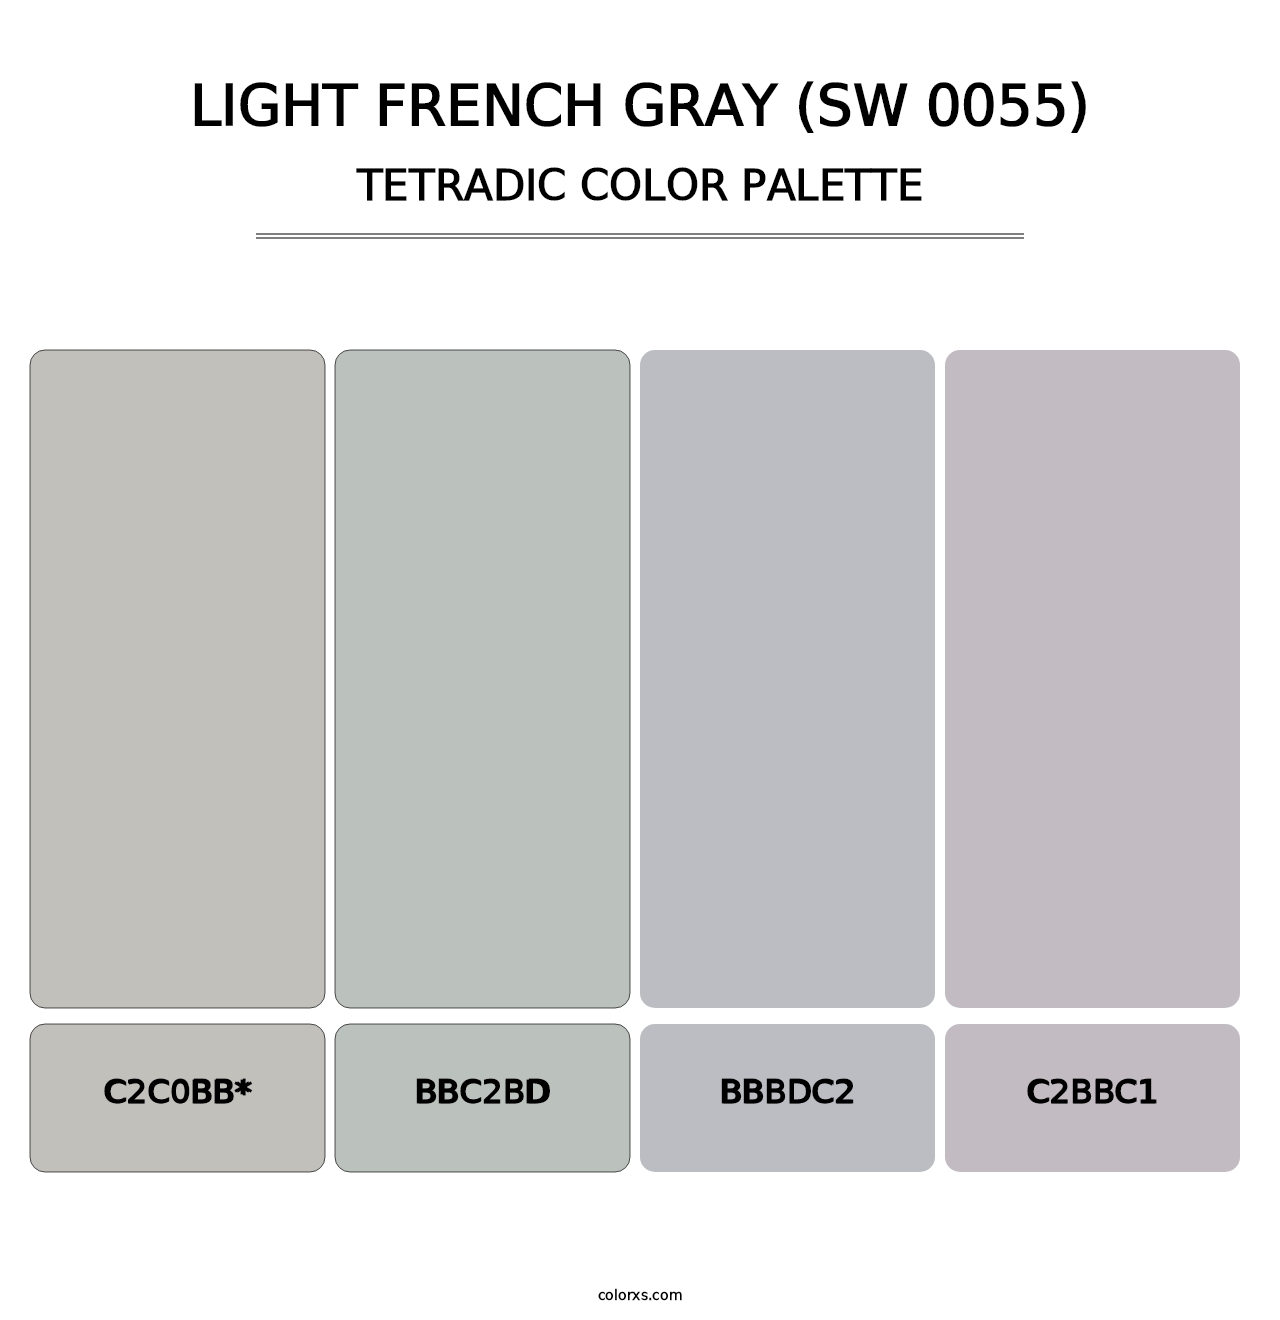 Light French Gray (SW 0055) - Tetradic Color Palette